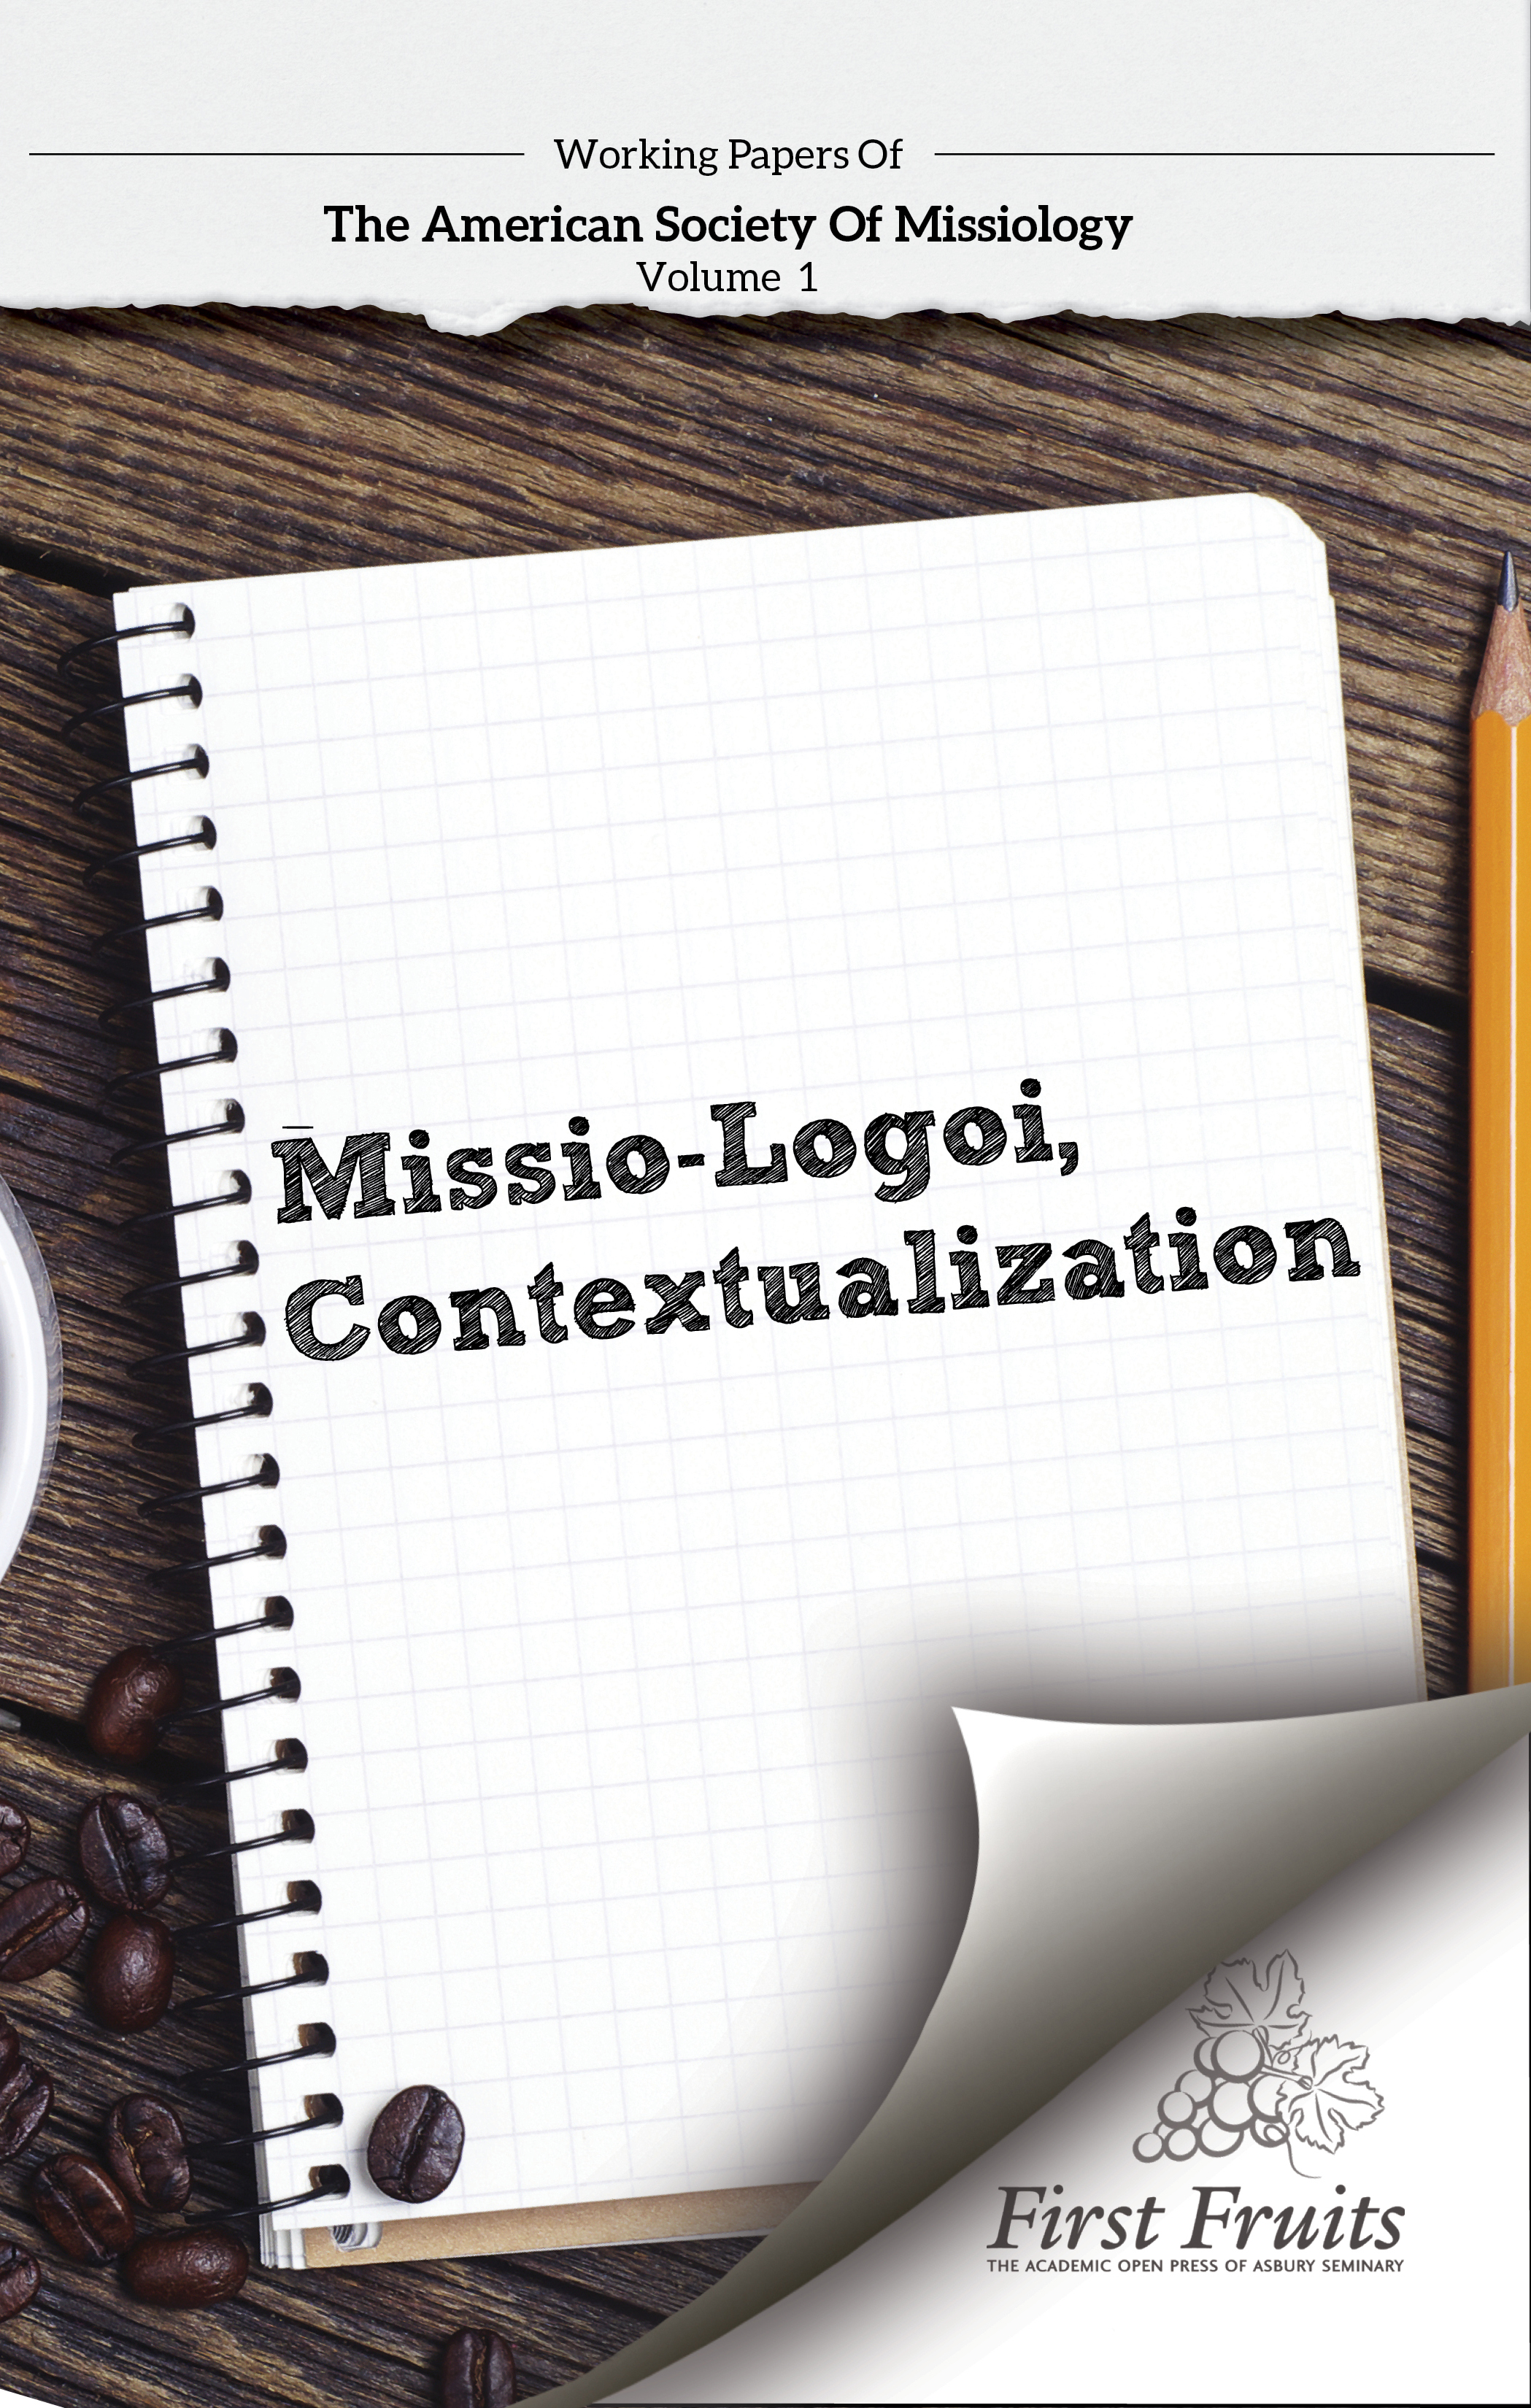 Working Papers Of The American Society Of Missiology; Volume 1 Missio-Logoi/ Contextualization